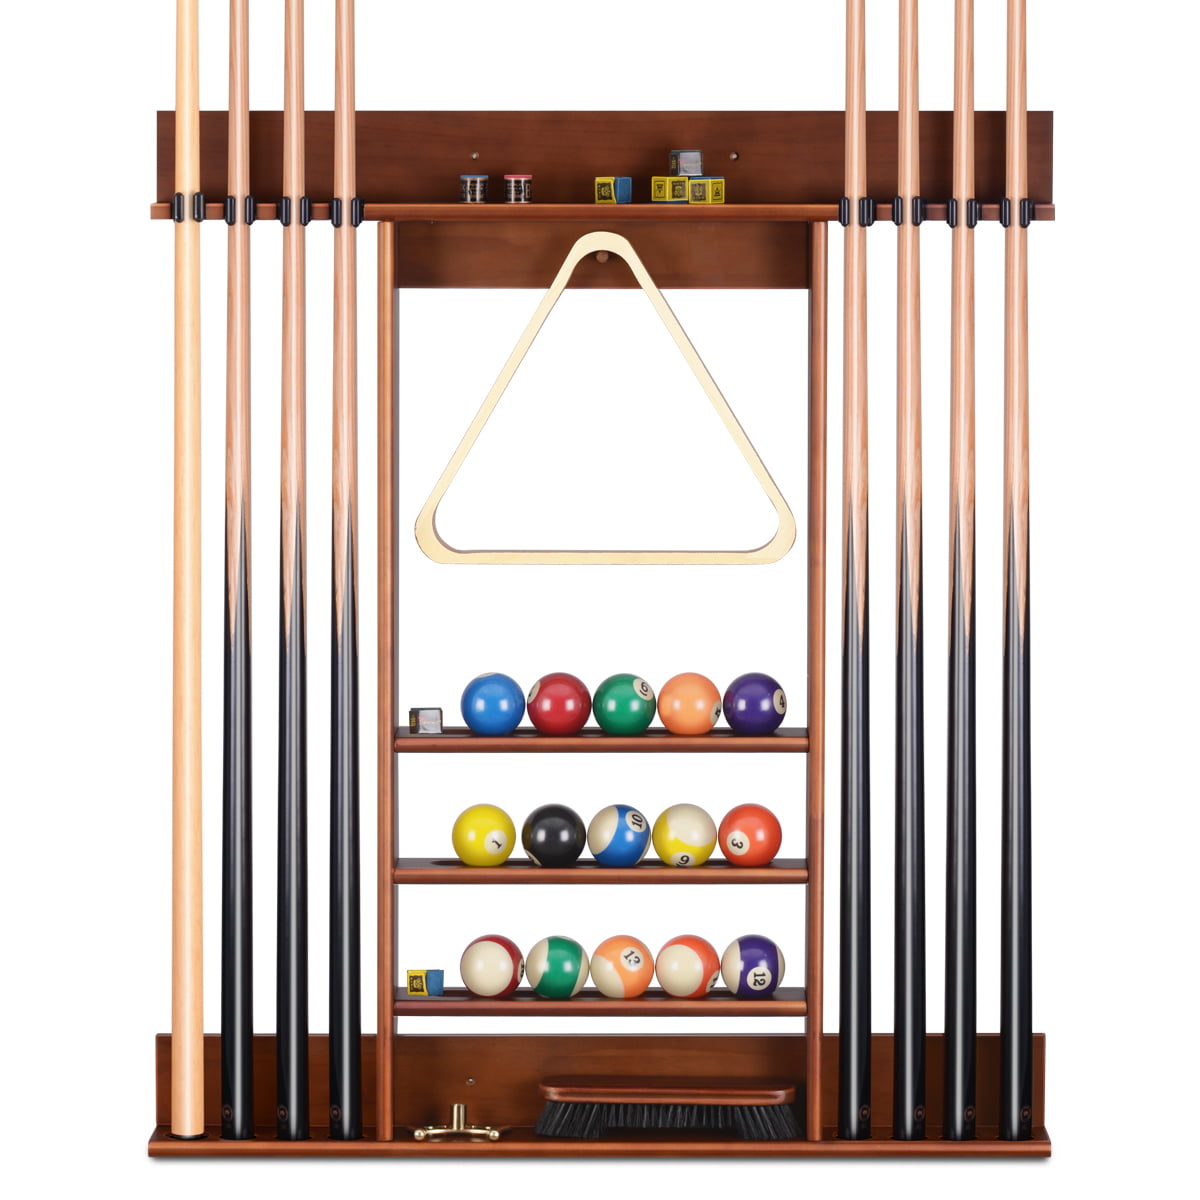 Mount Hold Wooden Pool Cue Rack Snooker Billiard Stick Holder Wall 6 Cues 